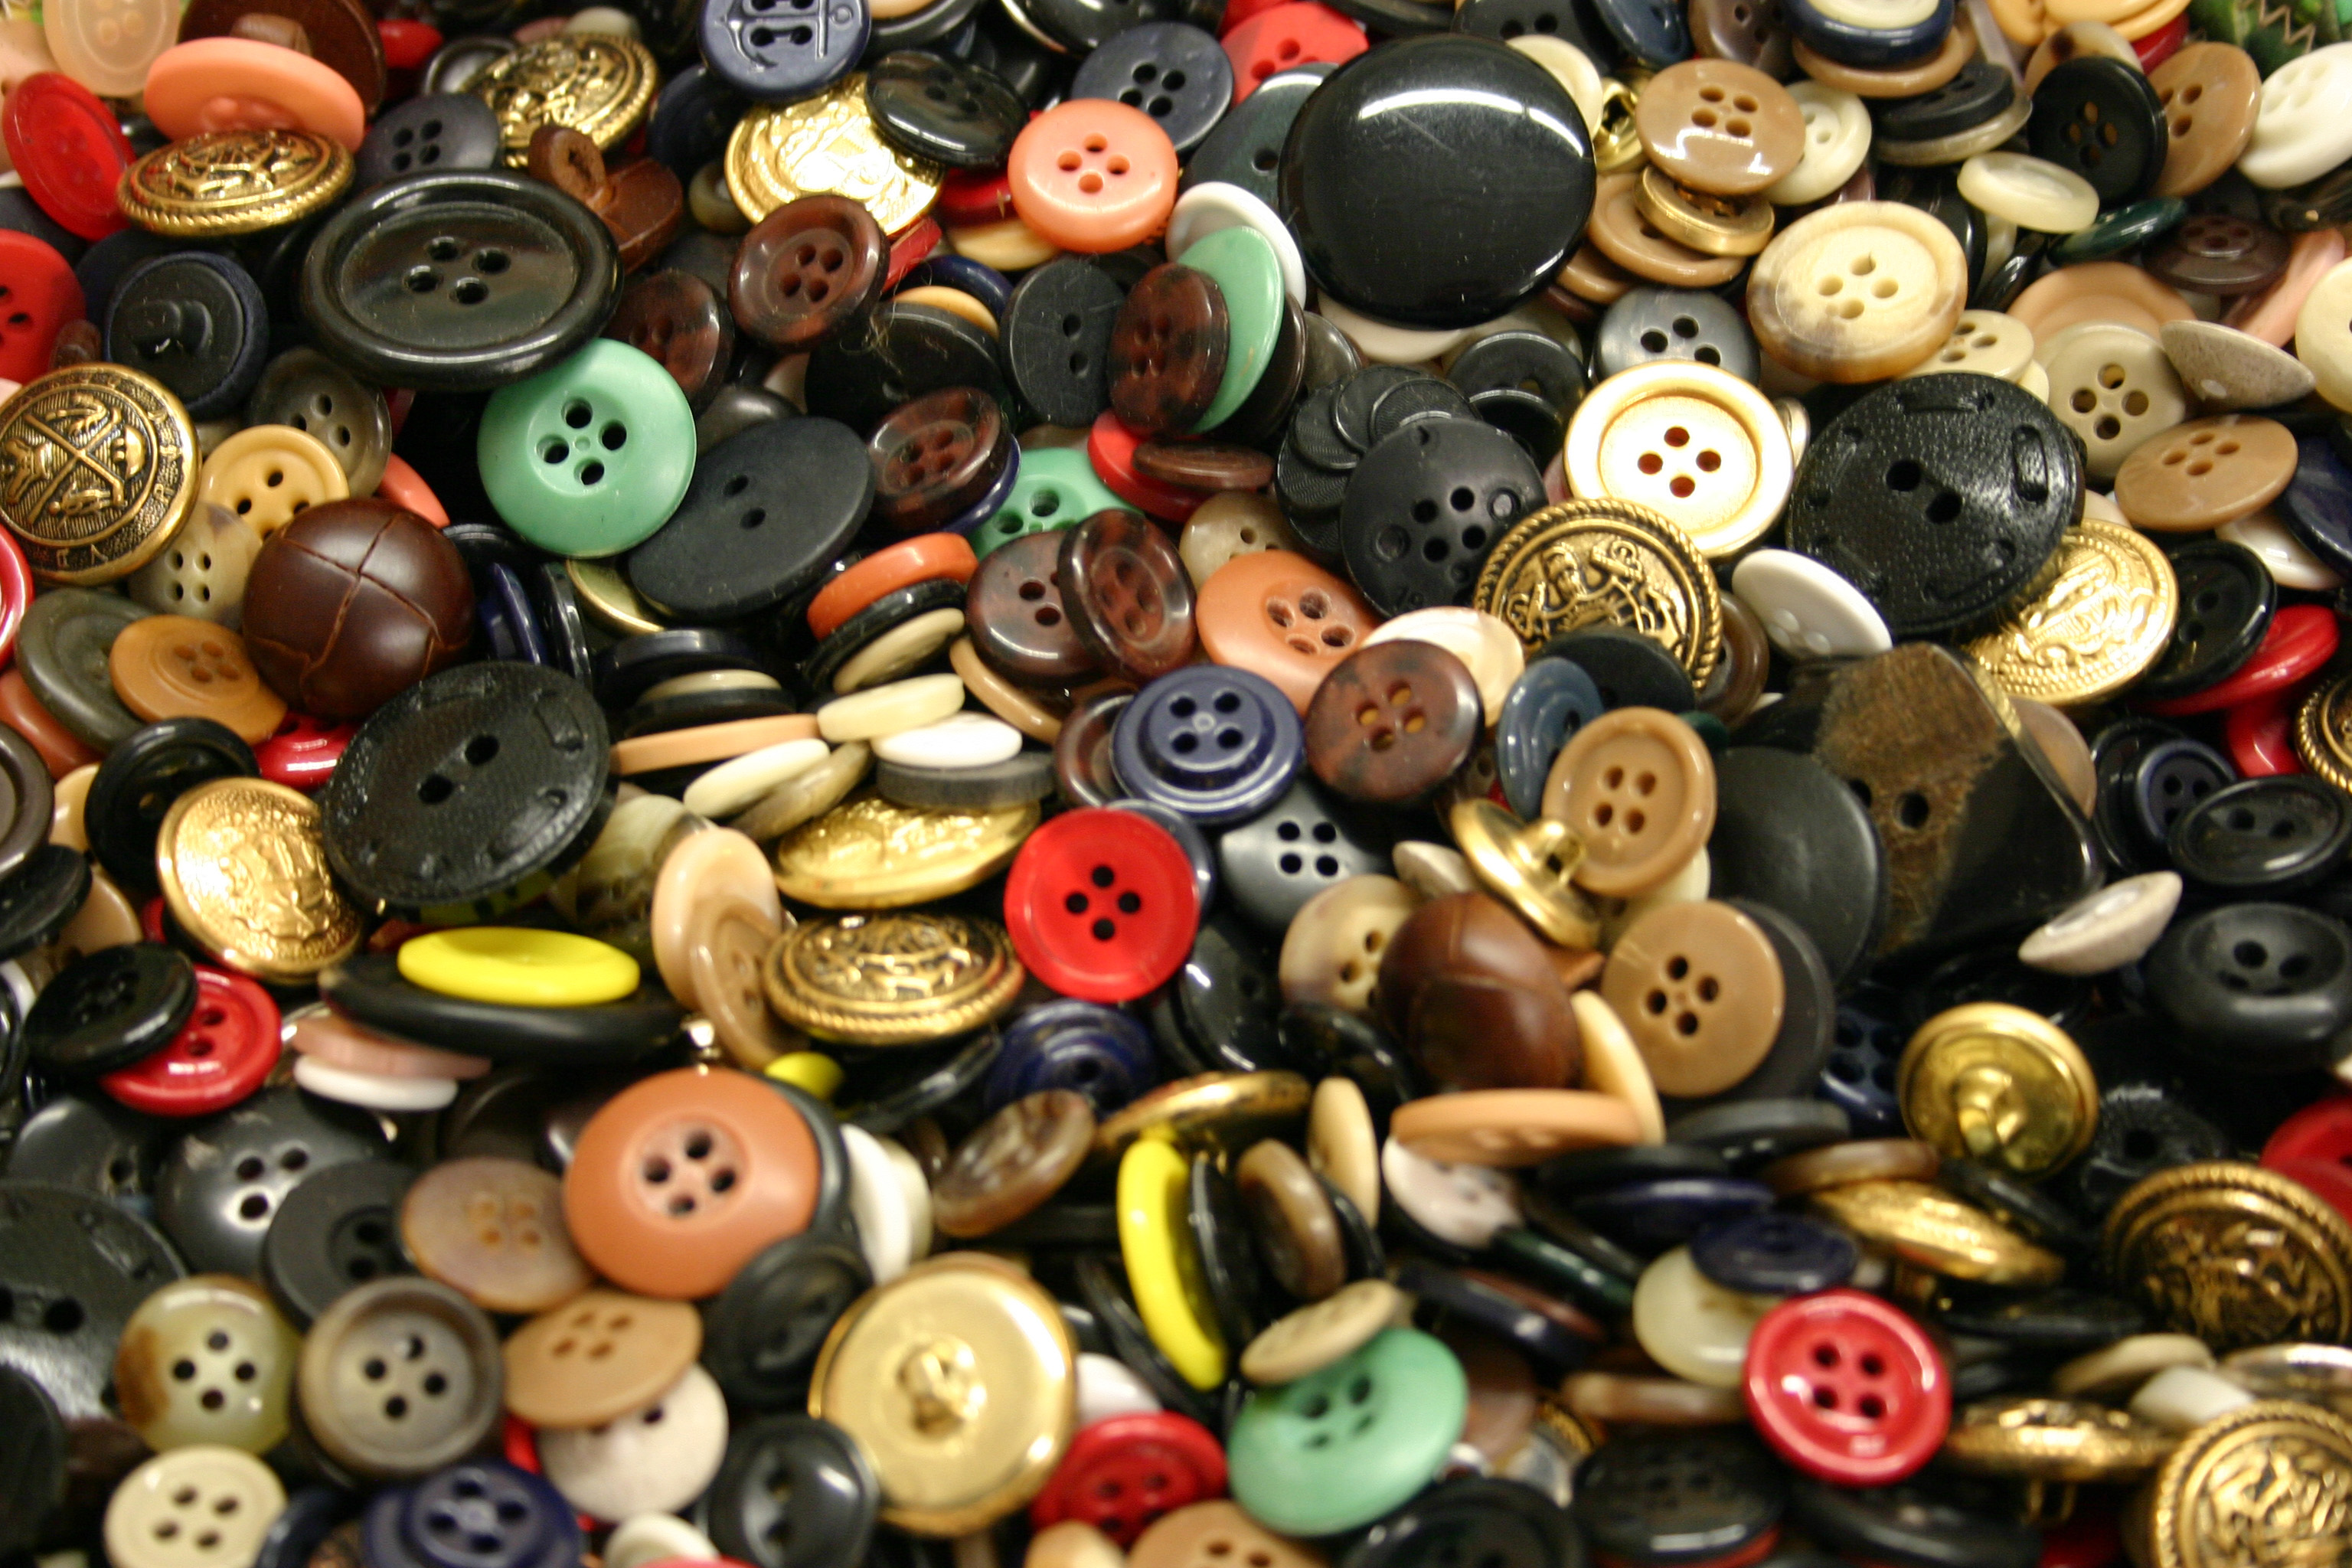 Bulk Buy New Buttons of Mixed Colors, Assorted Shapes, Varied Sizes - 250 grams (350-1000 buttons)